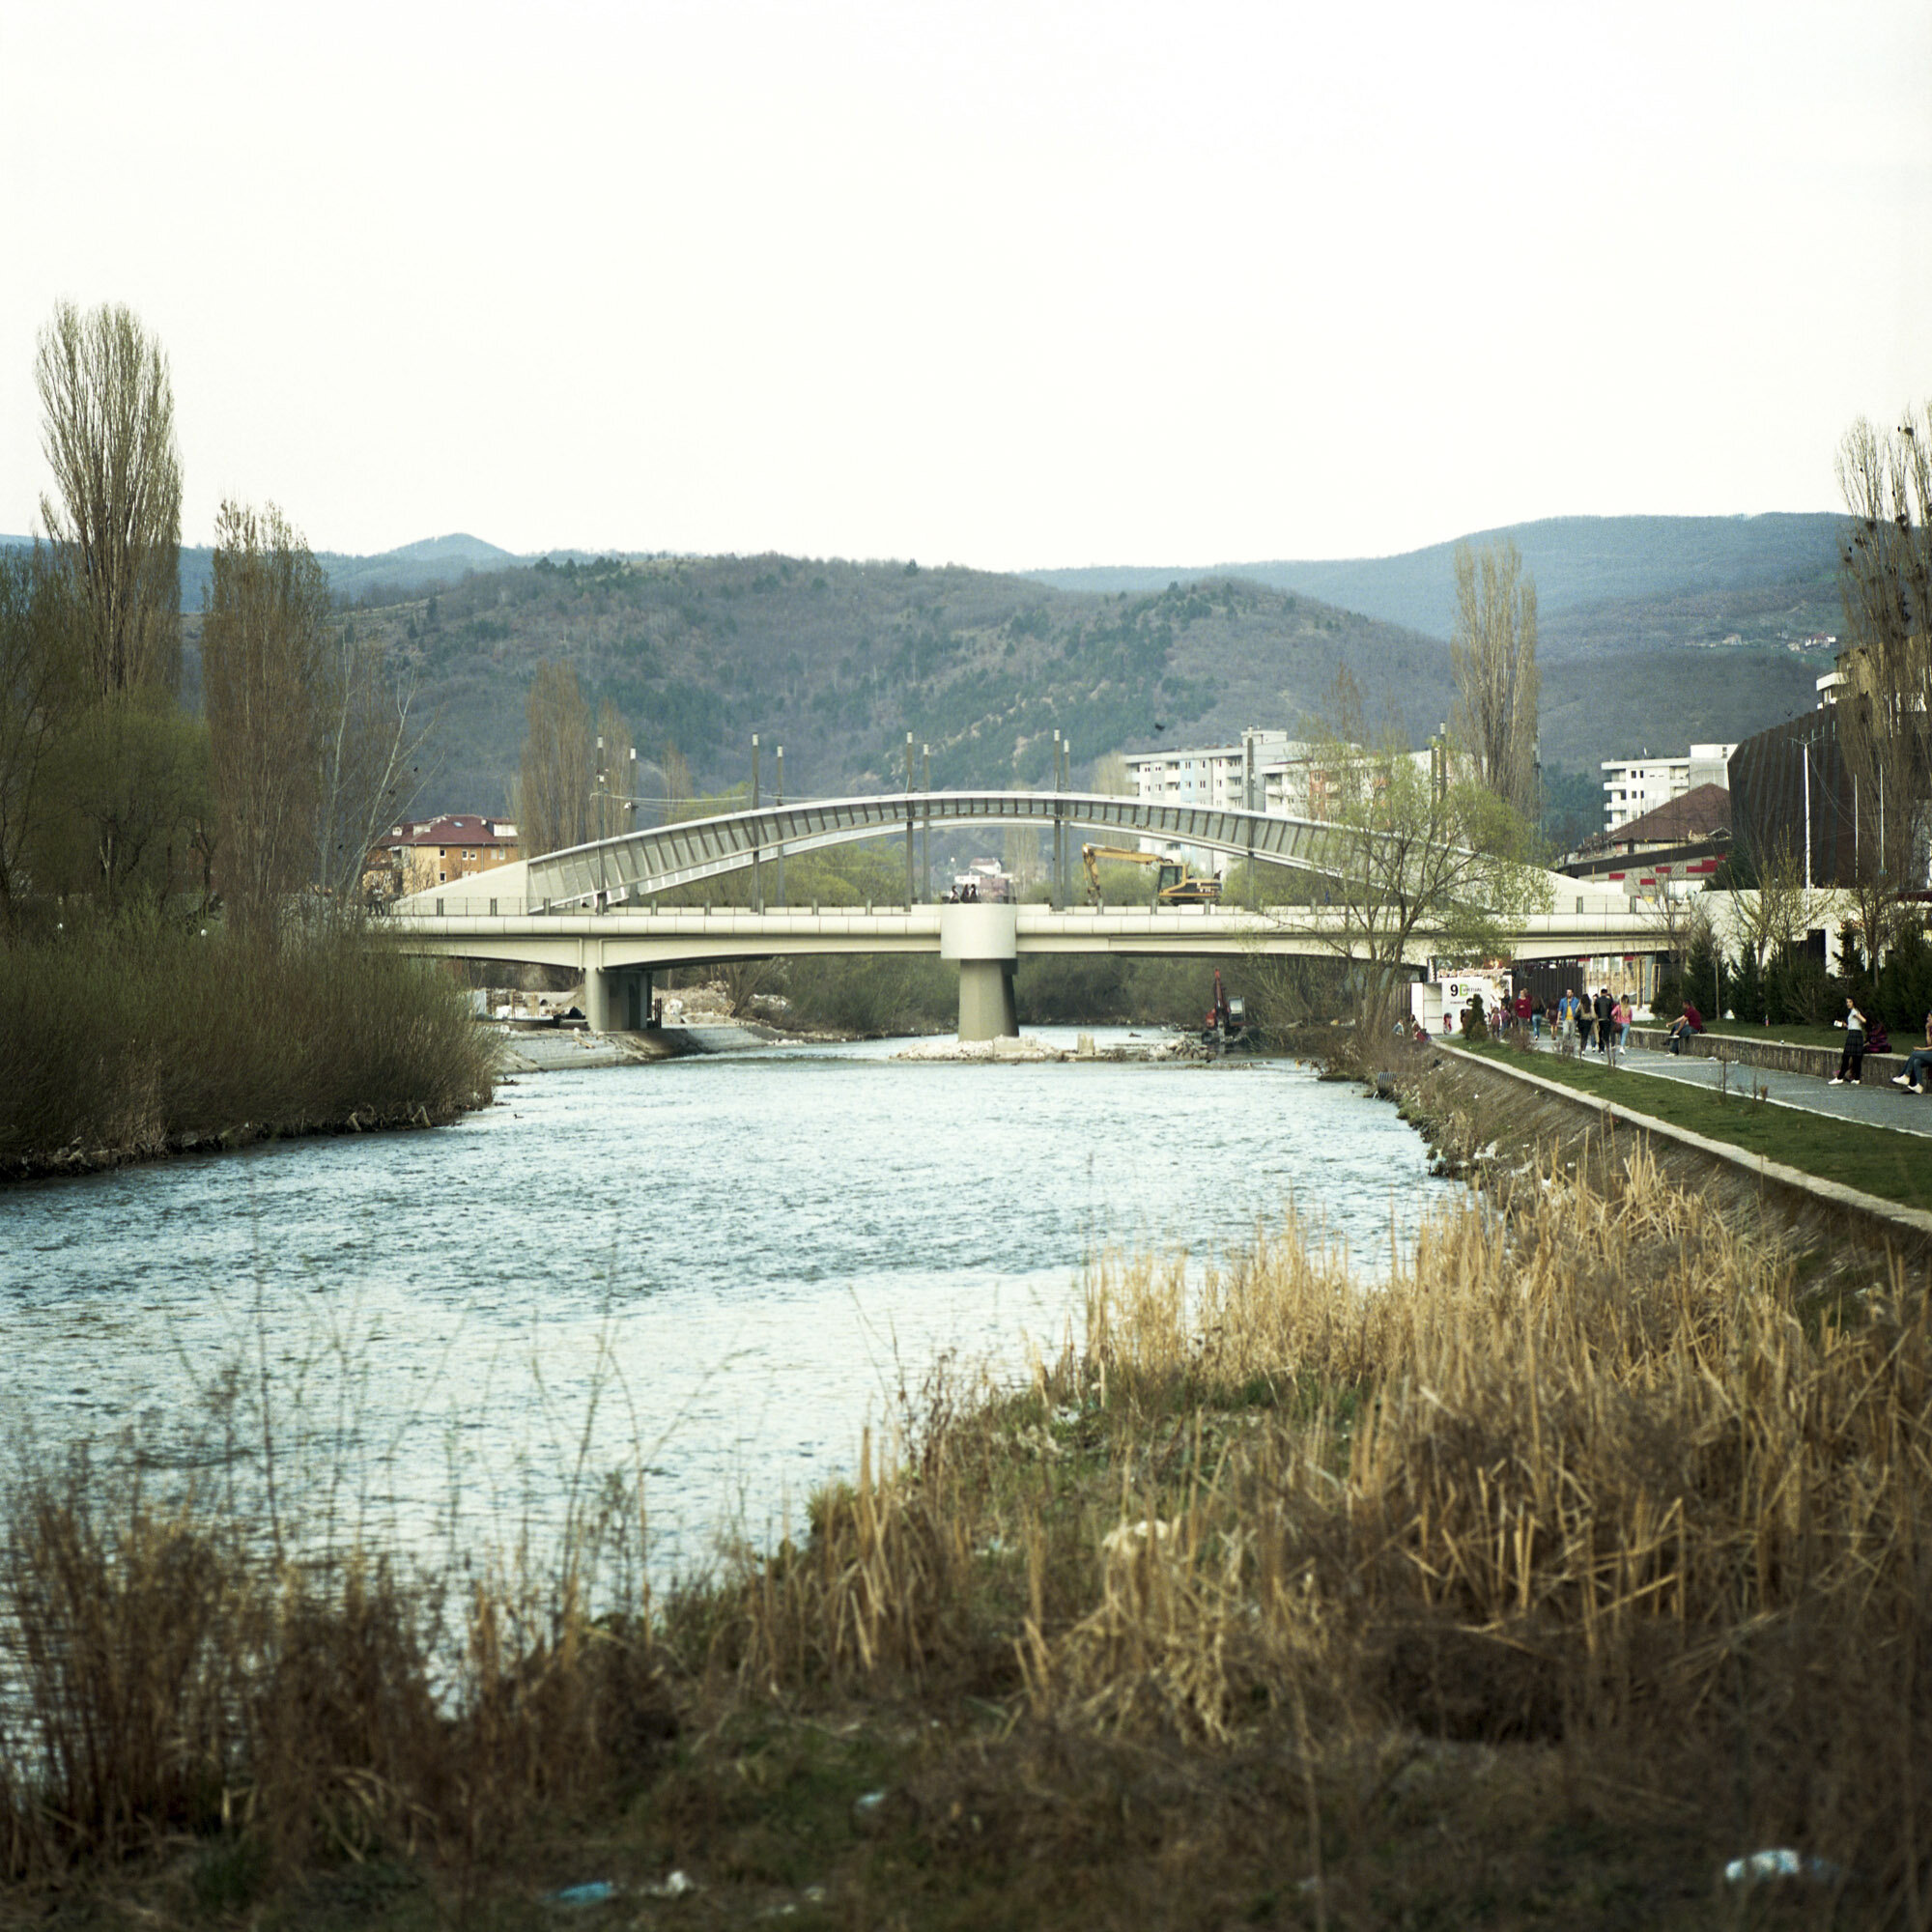  In Mitrovica, the main bridge across the Ibar river connects the Serbian and the Albanian sides of the city. Mitrovica, Kosovo, March 24, 2017. 